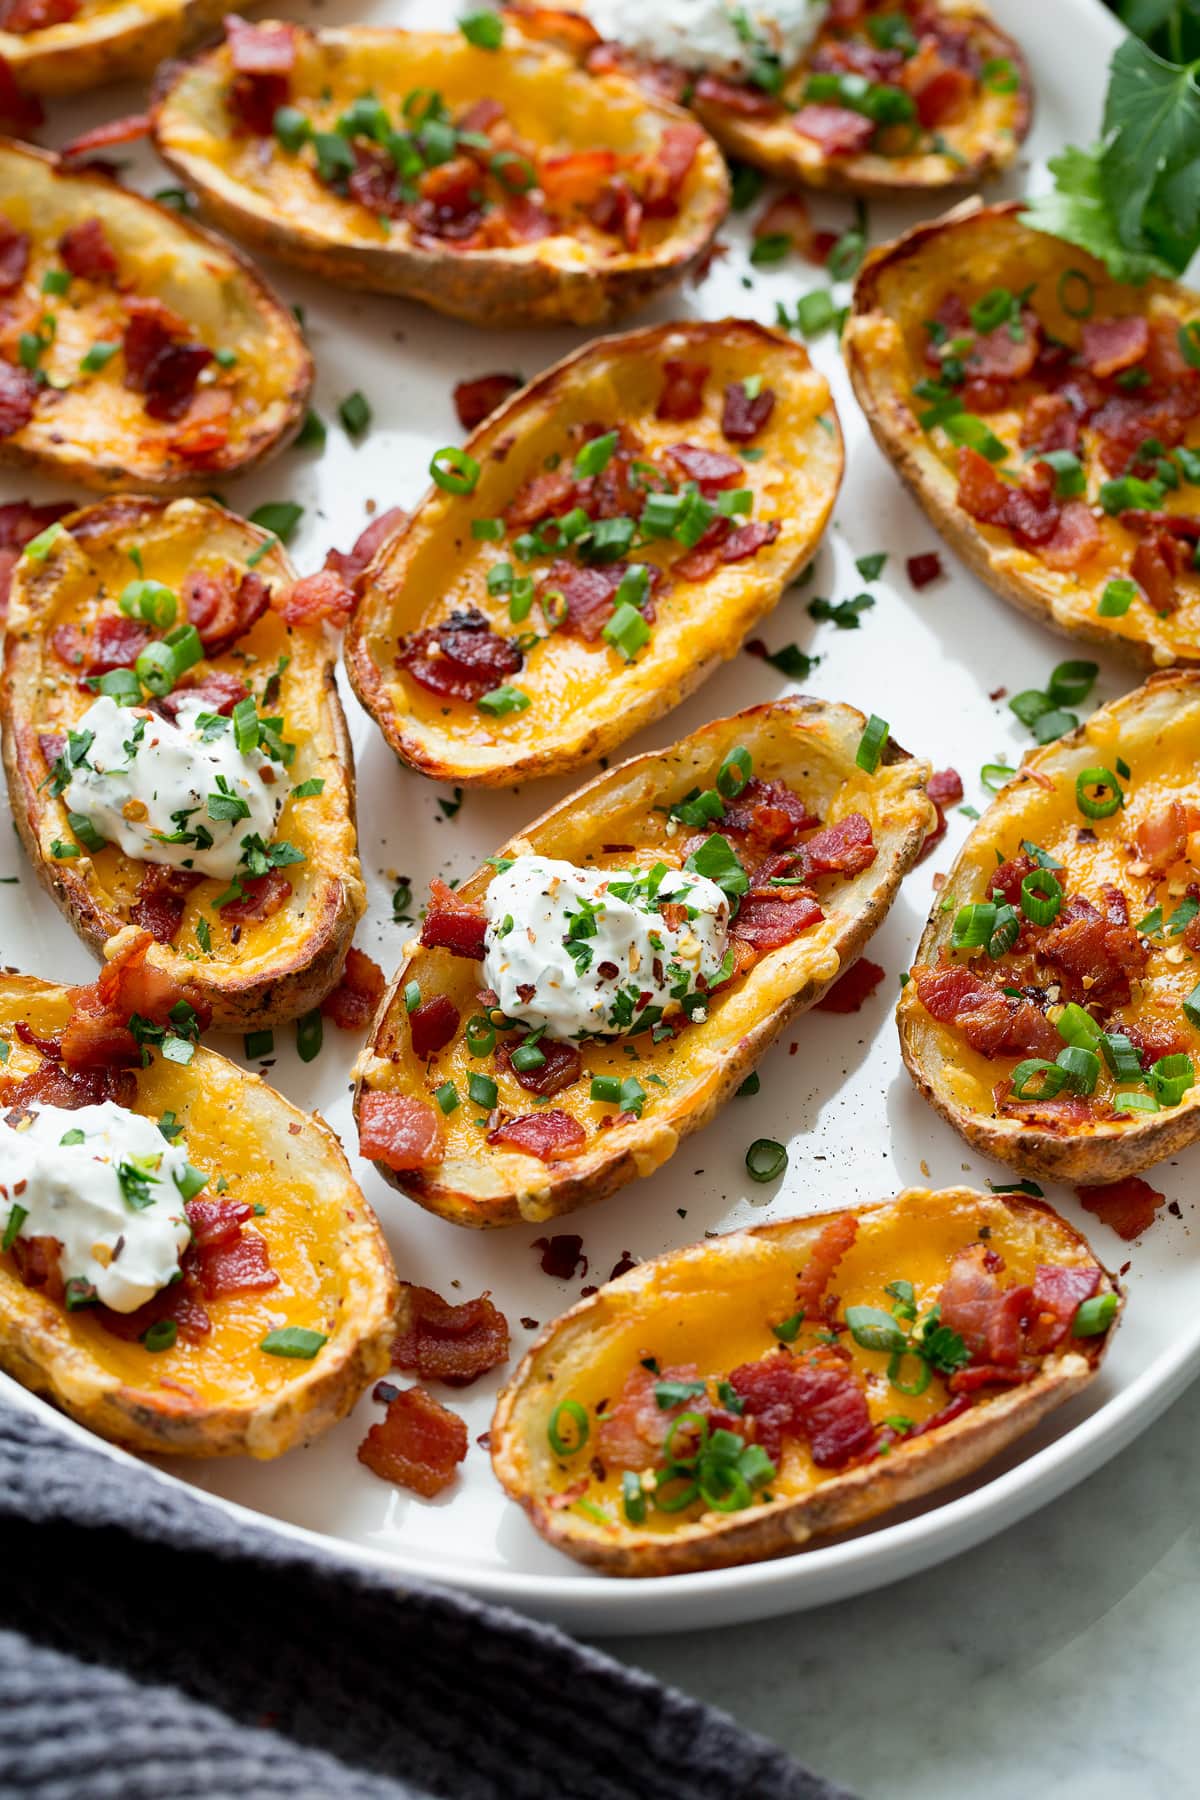 Potato skins shown from a side angle on a large serving platter.